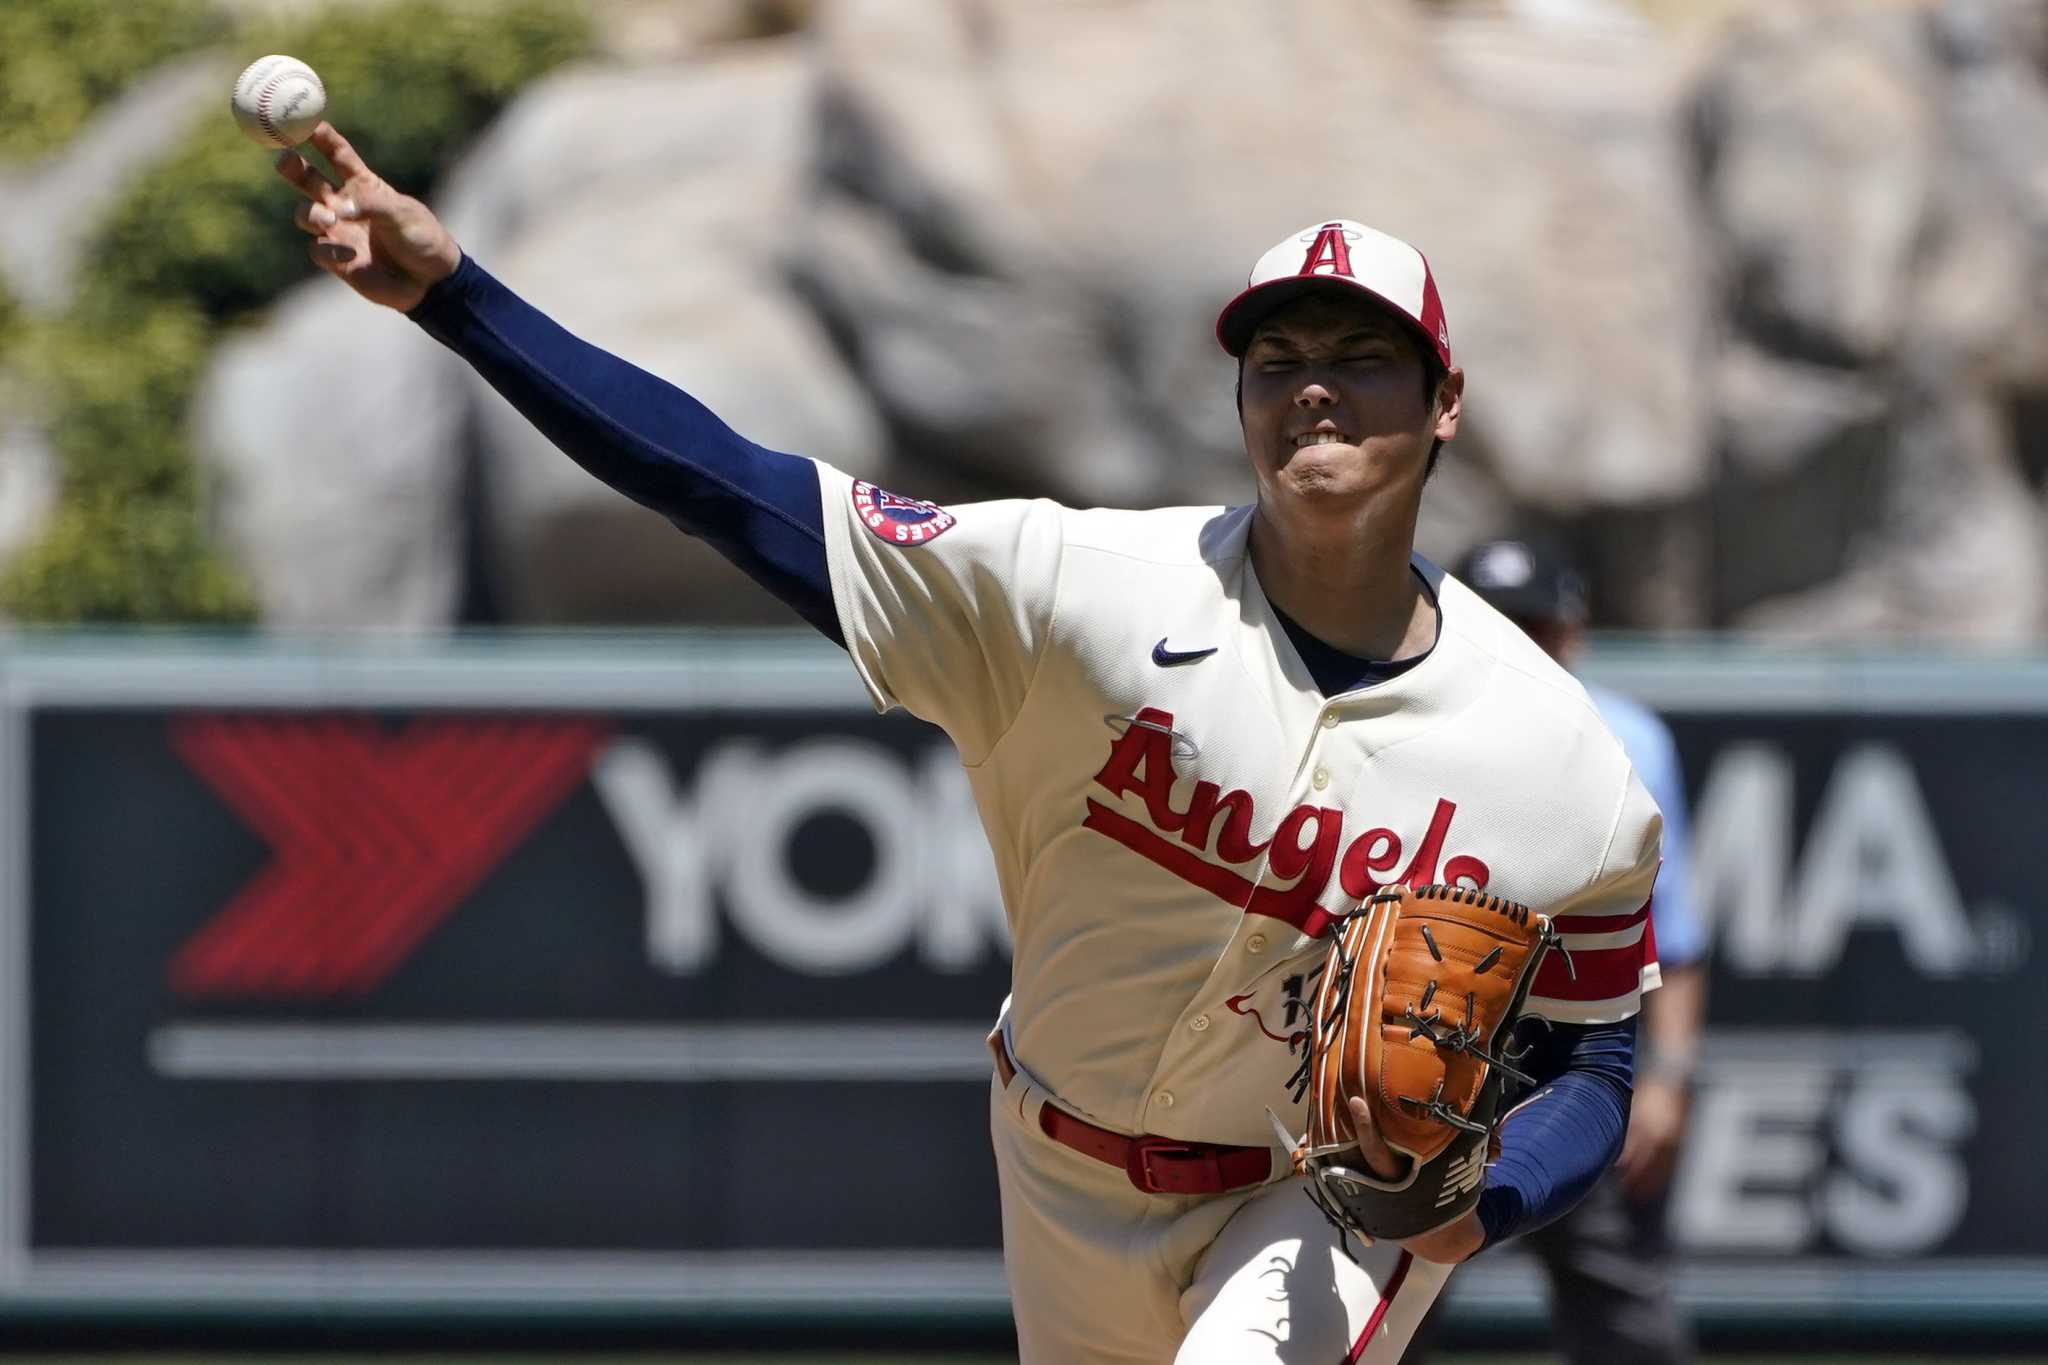 Angels' Shohei Ohtani named A.L. starting pitcher for All-Star